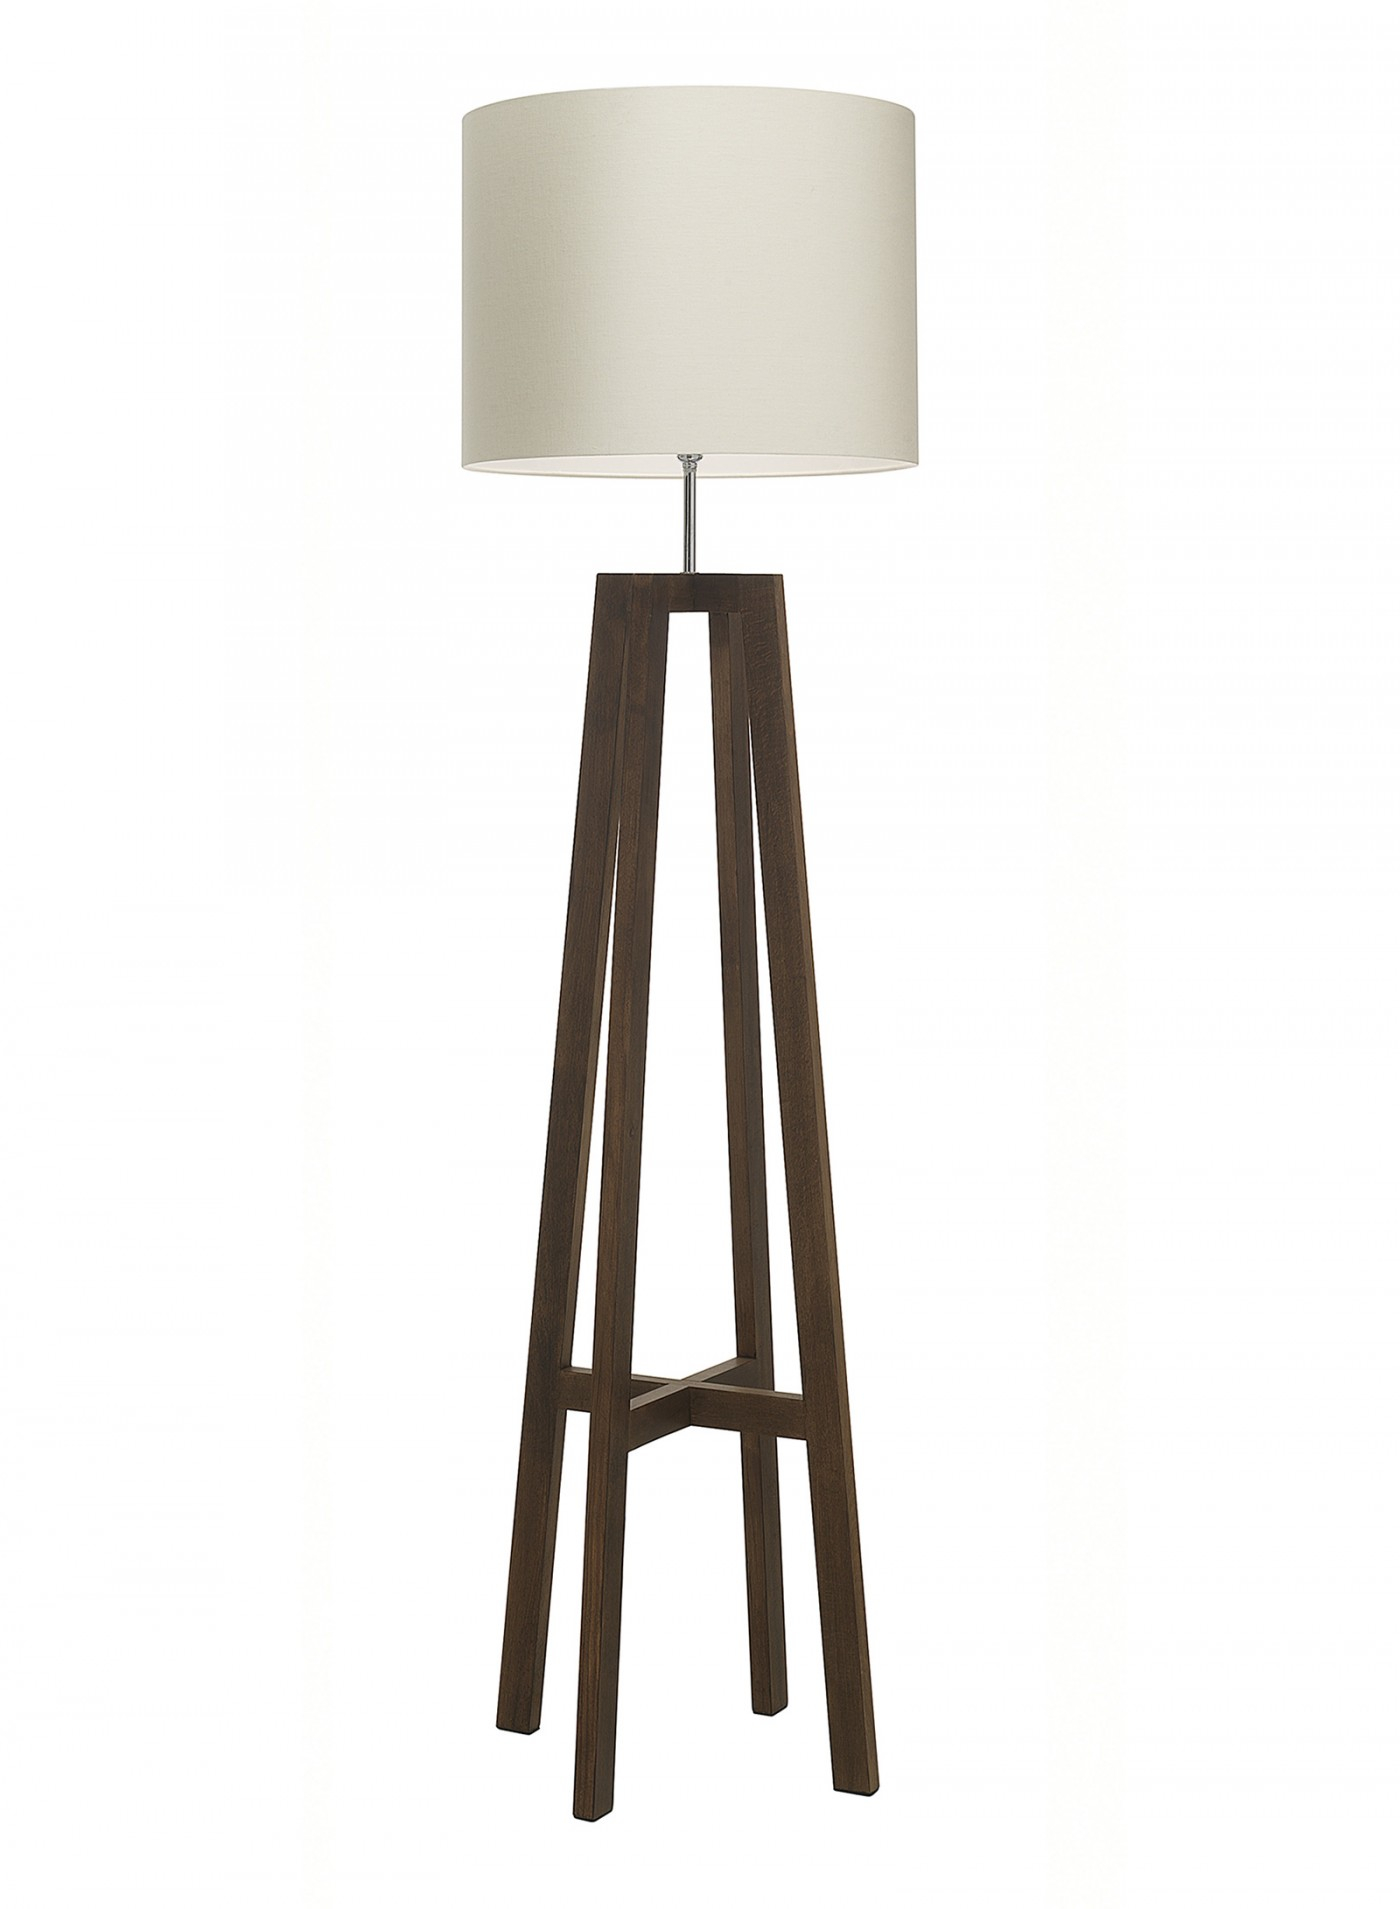 New Wooden Floor Lamp Uk Driftwood With Shade Rustic A throughout sizing 1400 X 1909